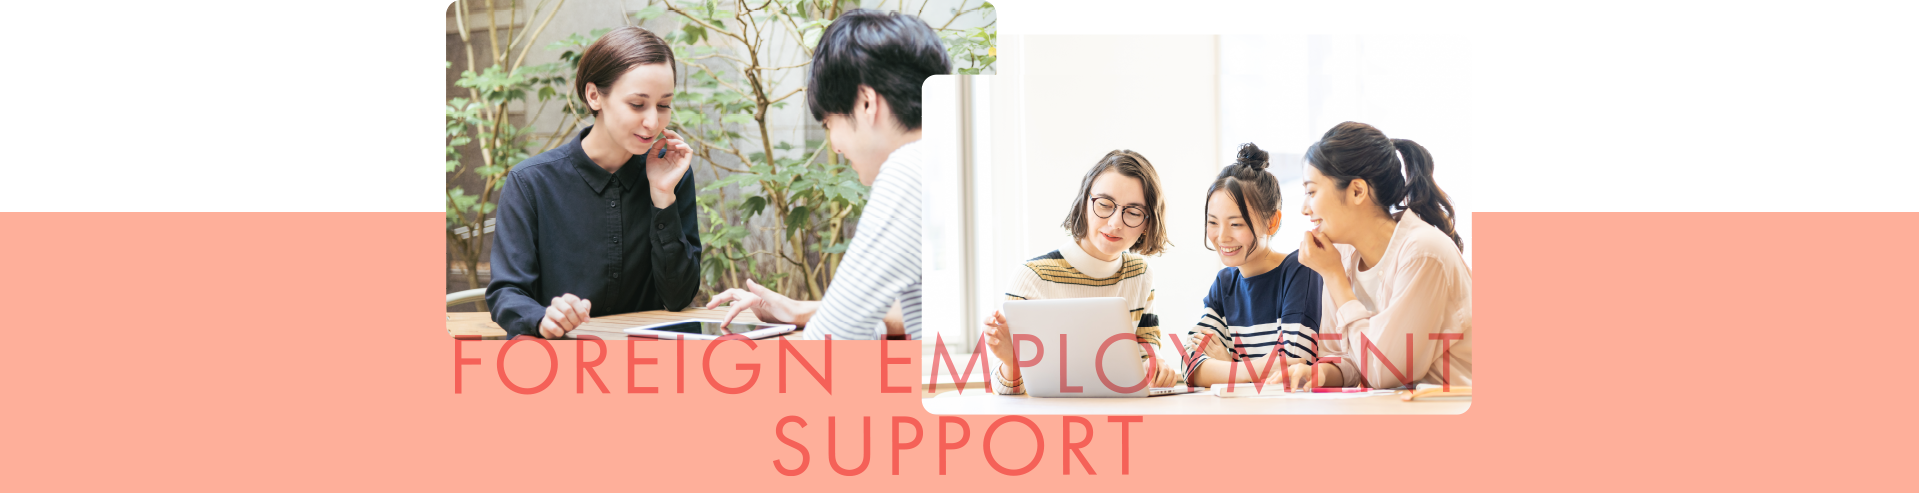 FOREIGN EMPLOYMENT SUPPORT